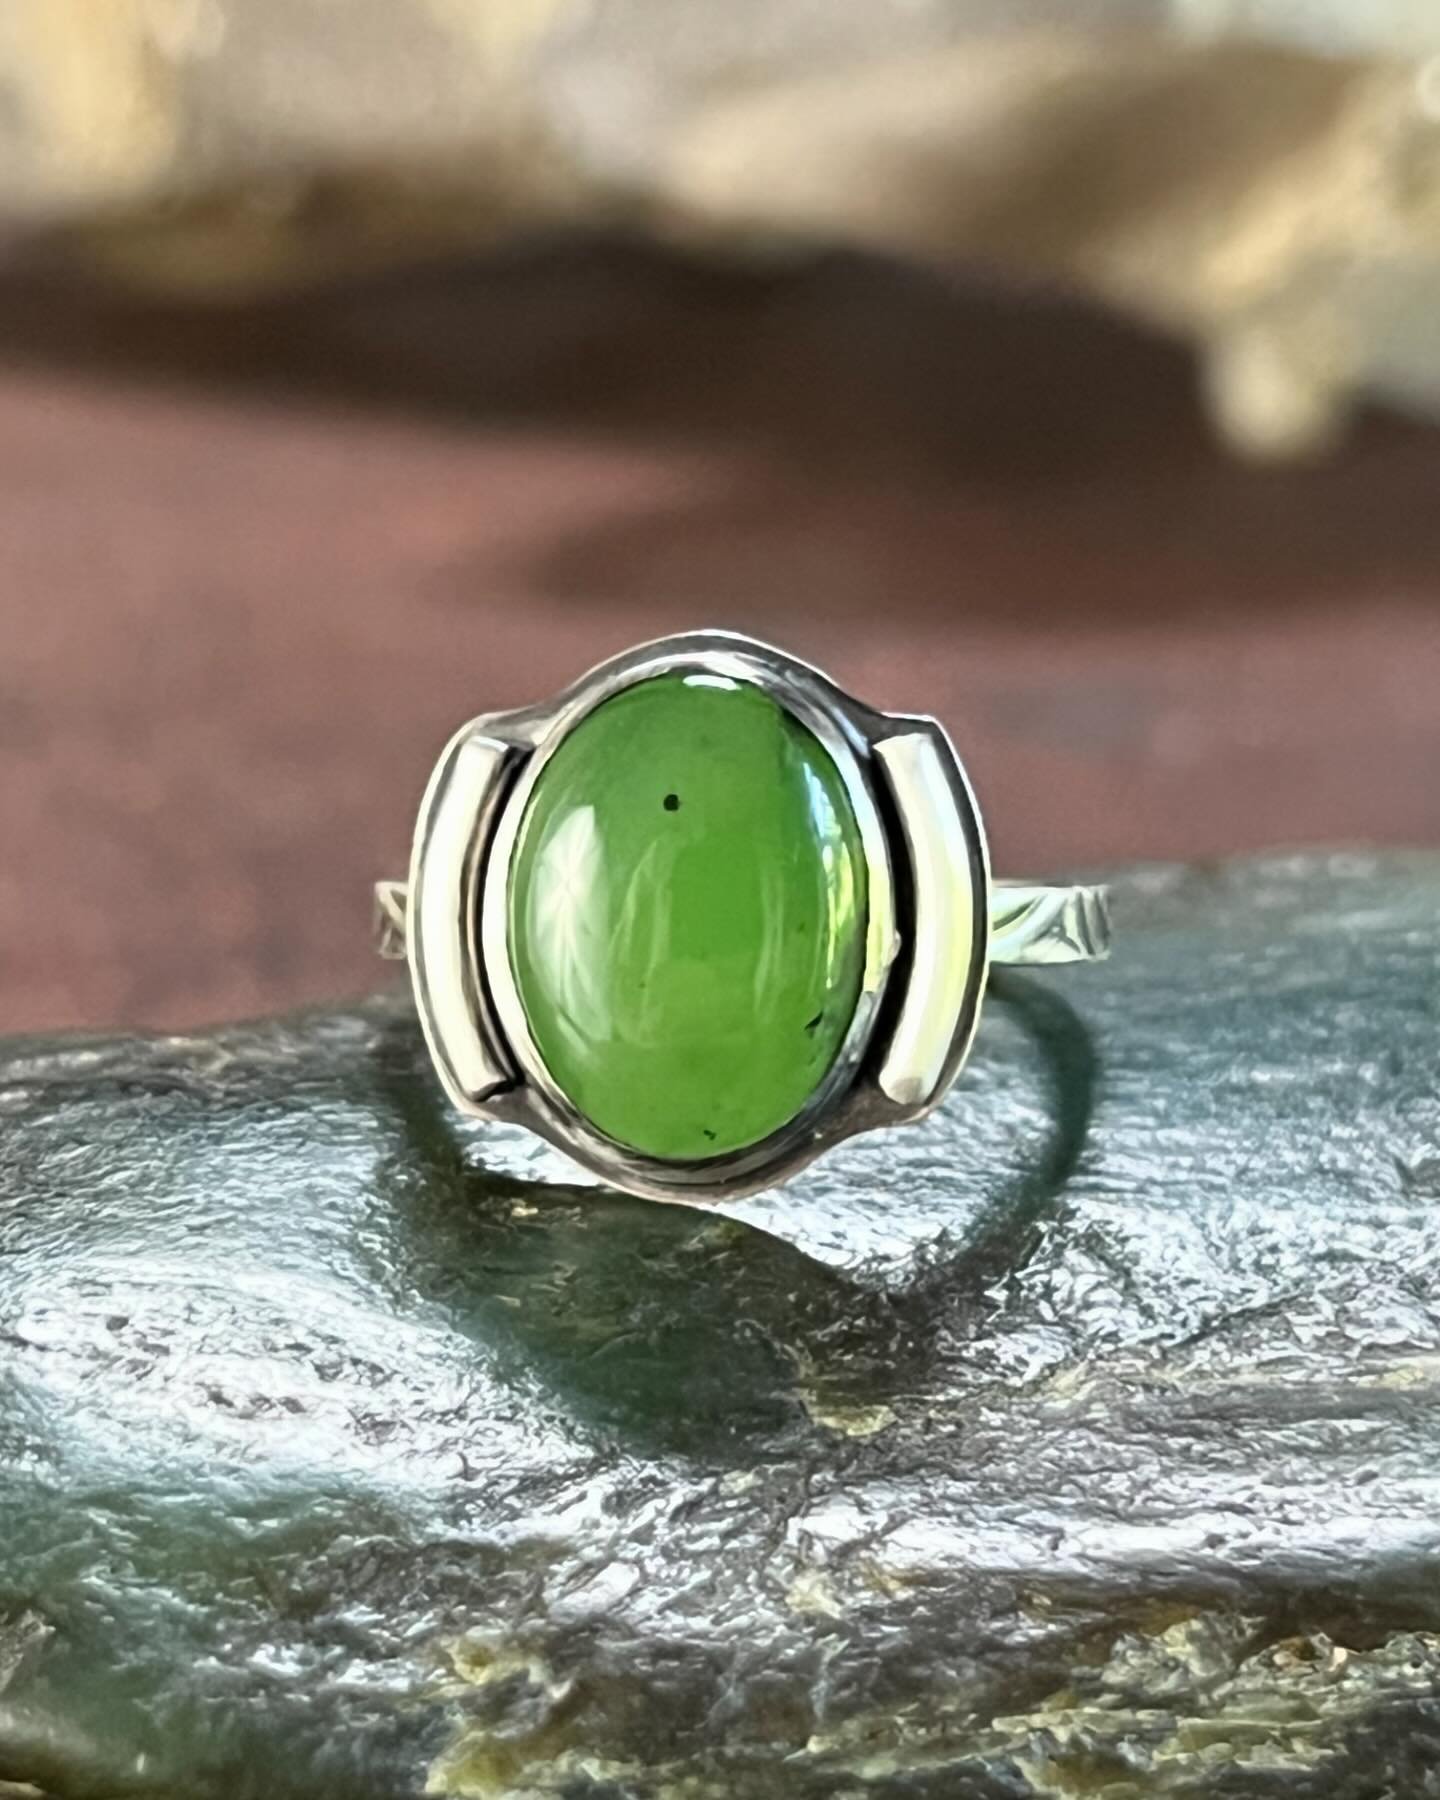 Introducing a size 7.5 sterling silver ring showcasing a mesmerizing green Siberian jade stone, capturing nature&rsquo;s allure with understated sophistication.

Added to my etsy store!